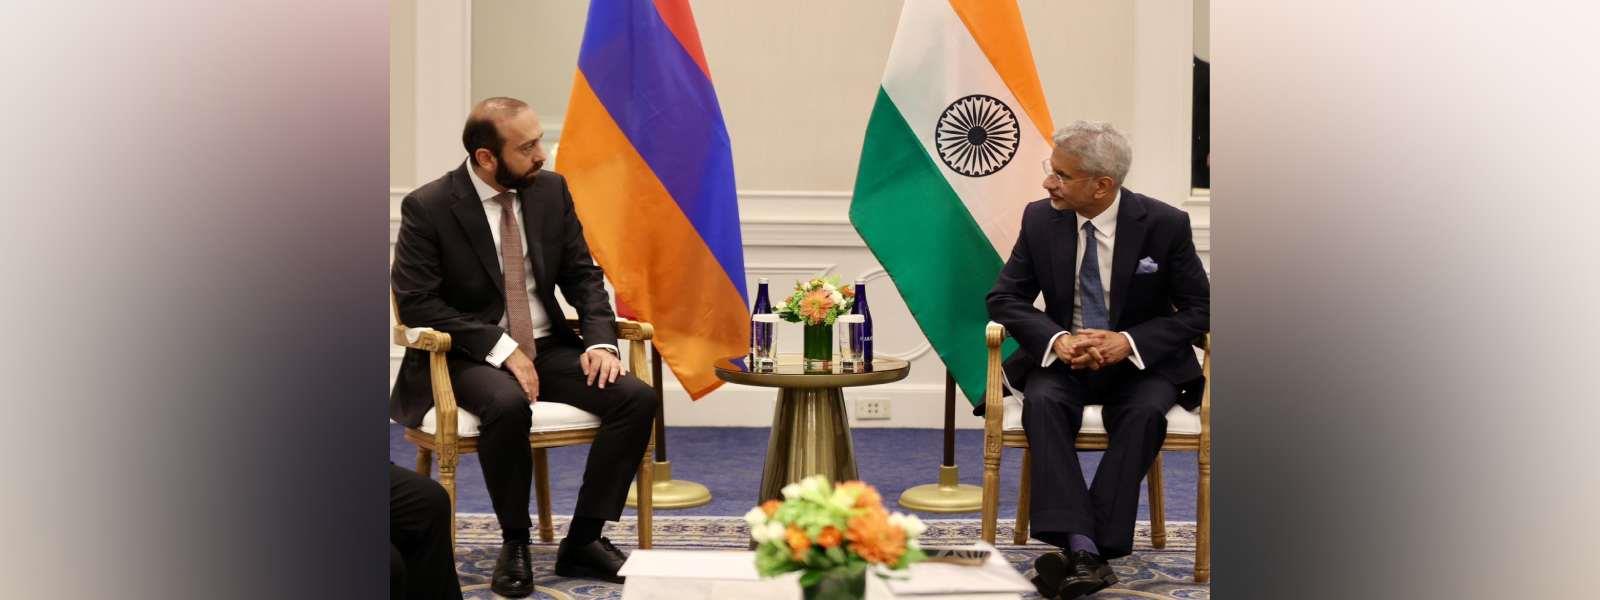 External Affairs Minister Dr. S. Jaishankar met H.E. Mr. Ararat Mirzoyan, Foreign Minister of Armenia on the sidelines of 78th Session of the UNGA in New York